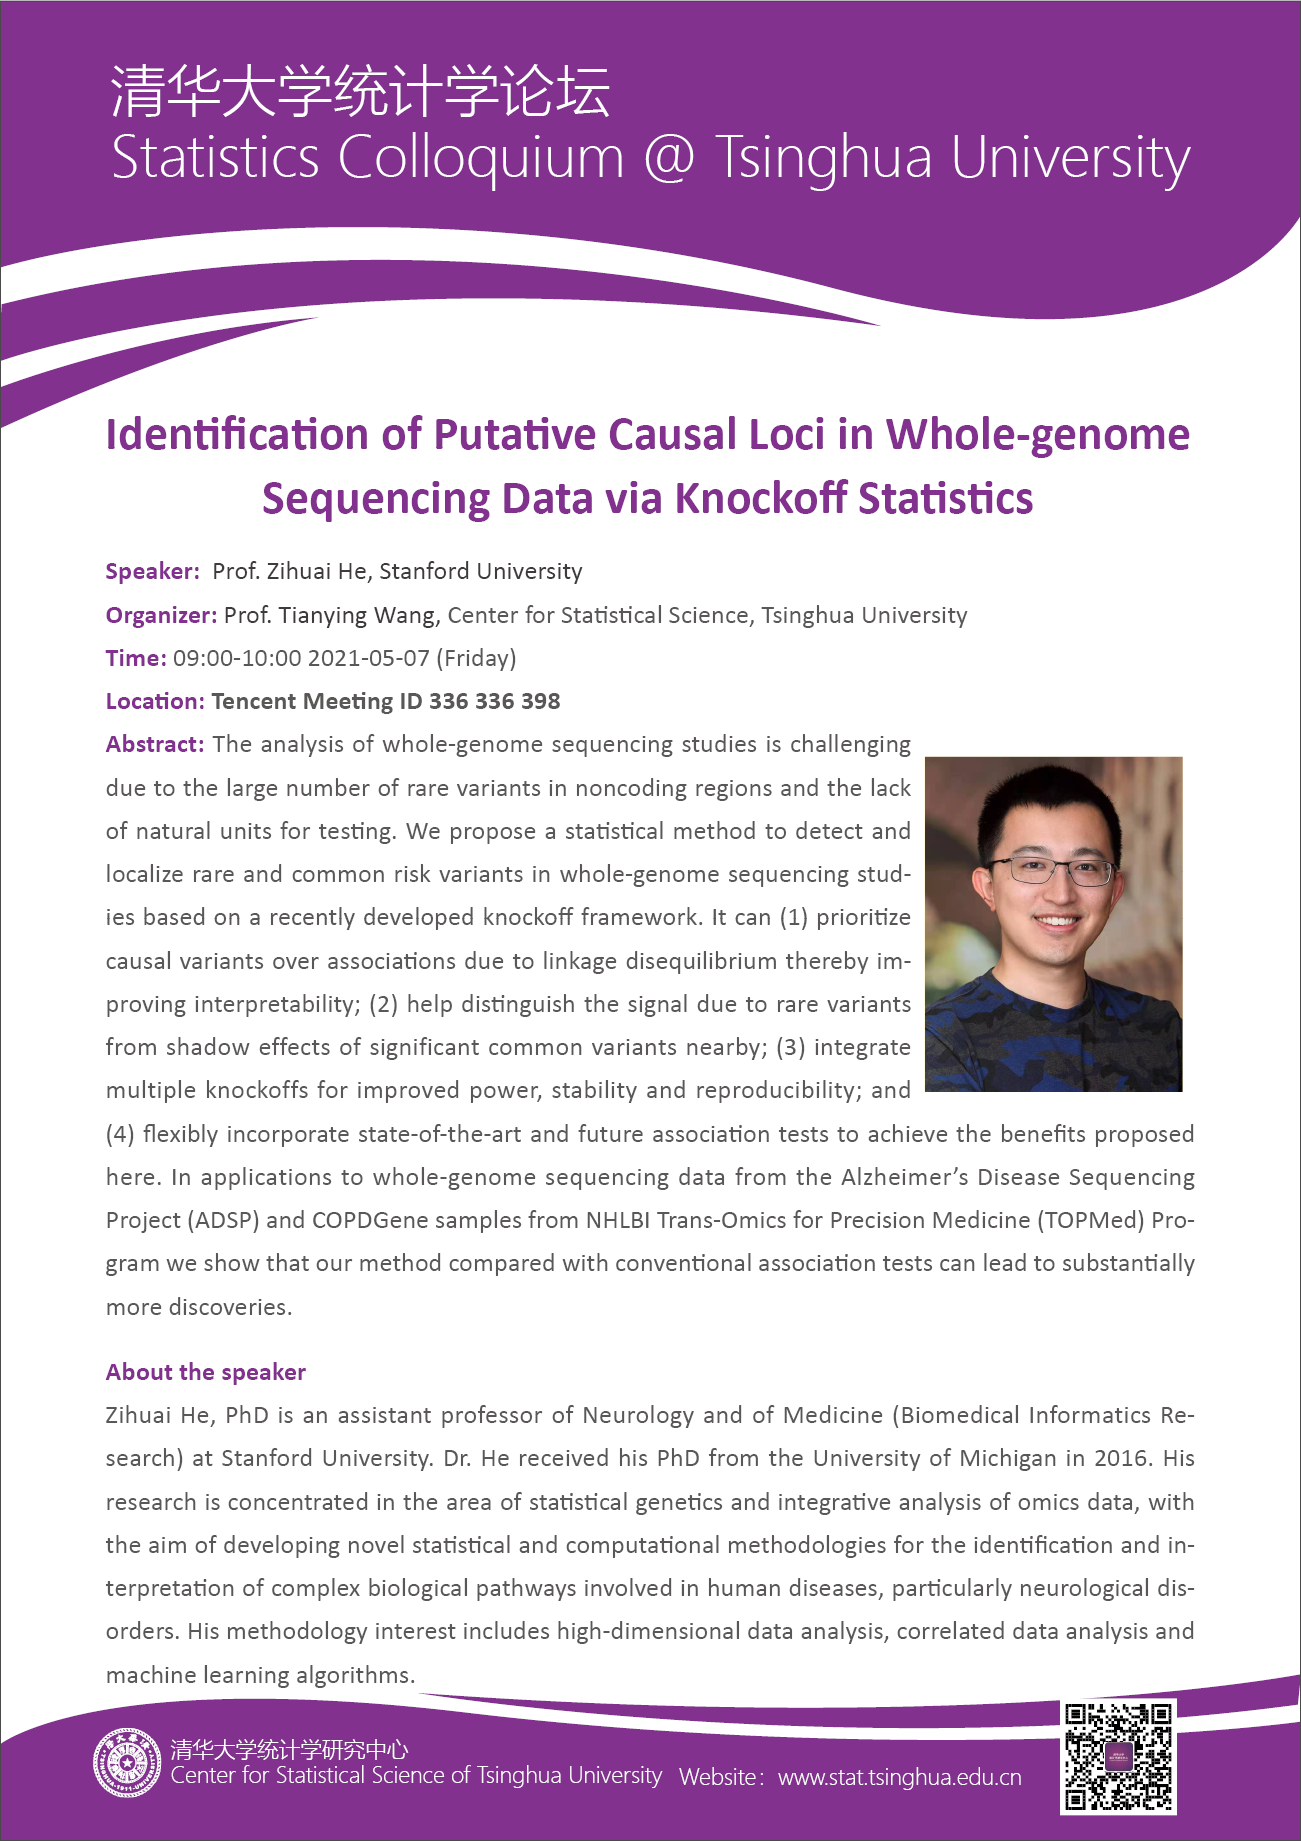 Identification of Putative Causal Loci in Whole-genome Sequencing Data via Knockoff Statistics